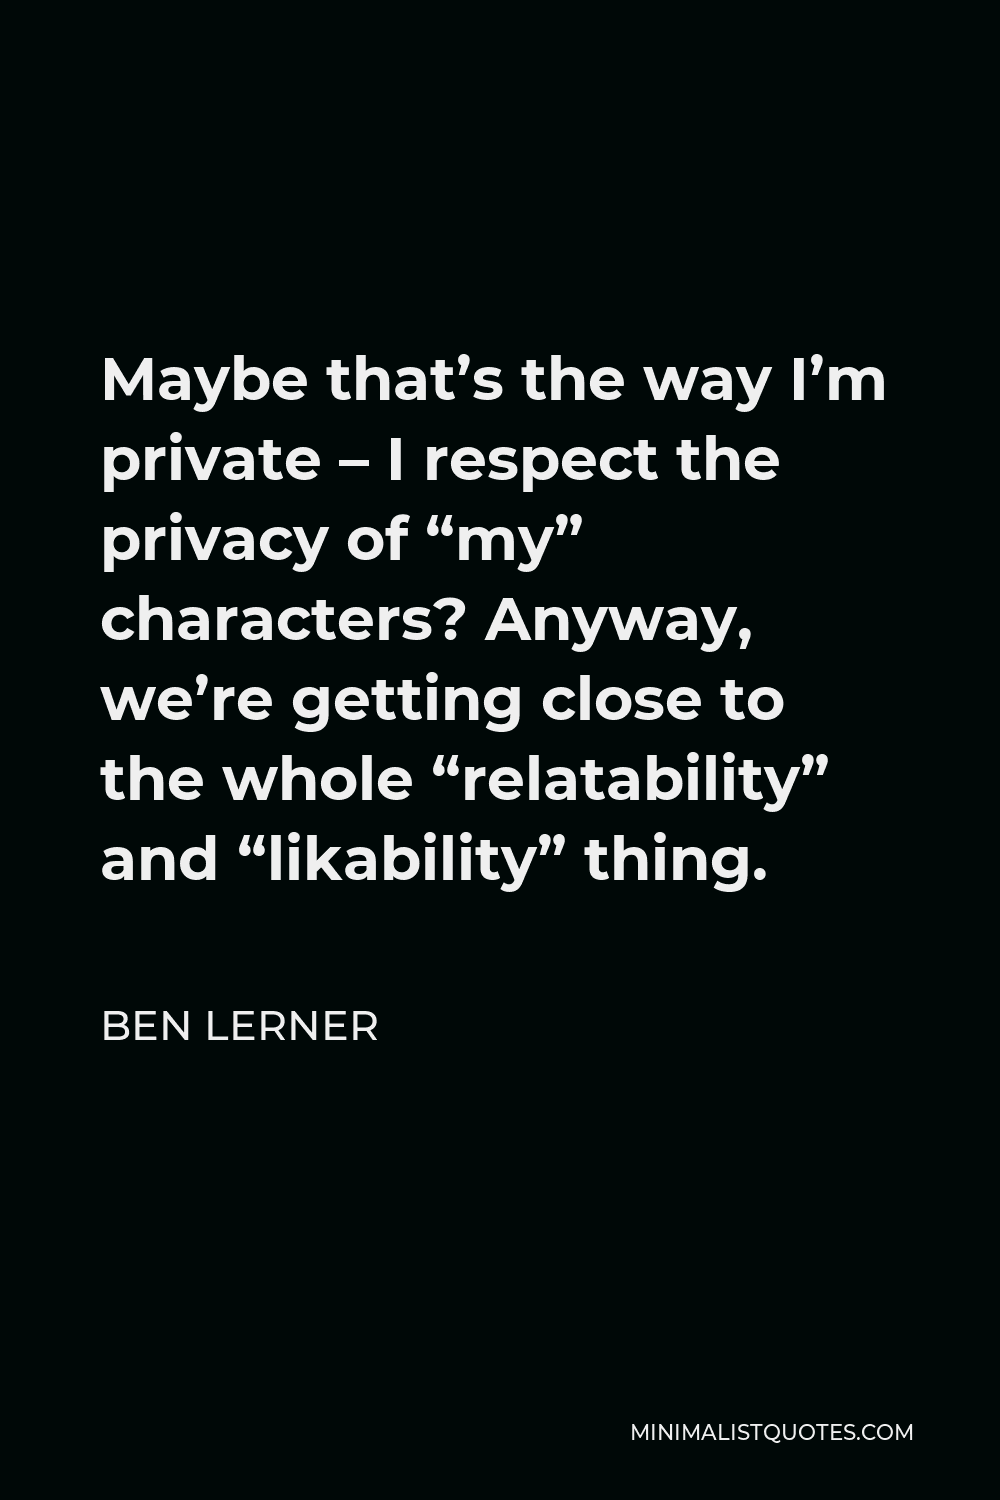 Ben Lerner Quote - Maybe that’s the way I’m private – I respect the privacy of “my” characters? Anyway, we’re getting close to the whole “relatability” and “likability” thing.